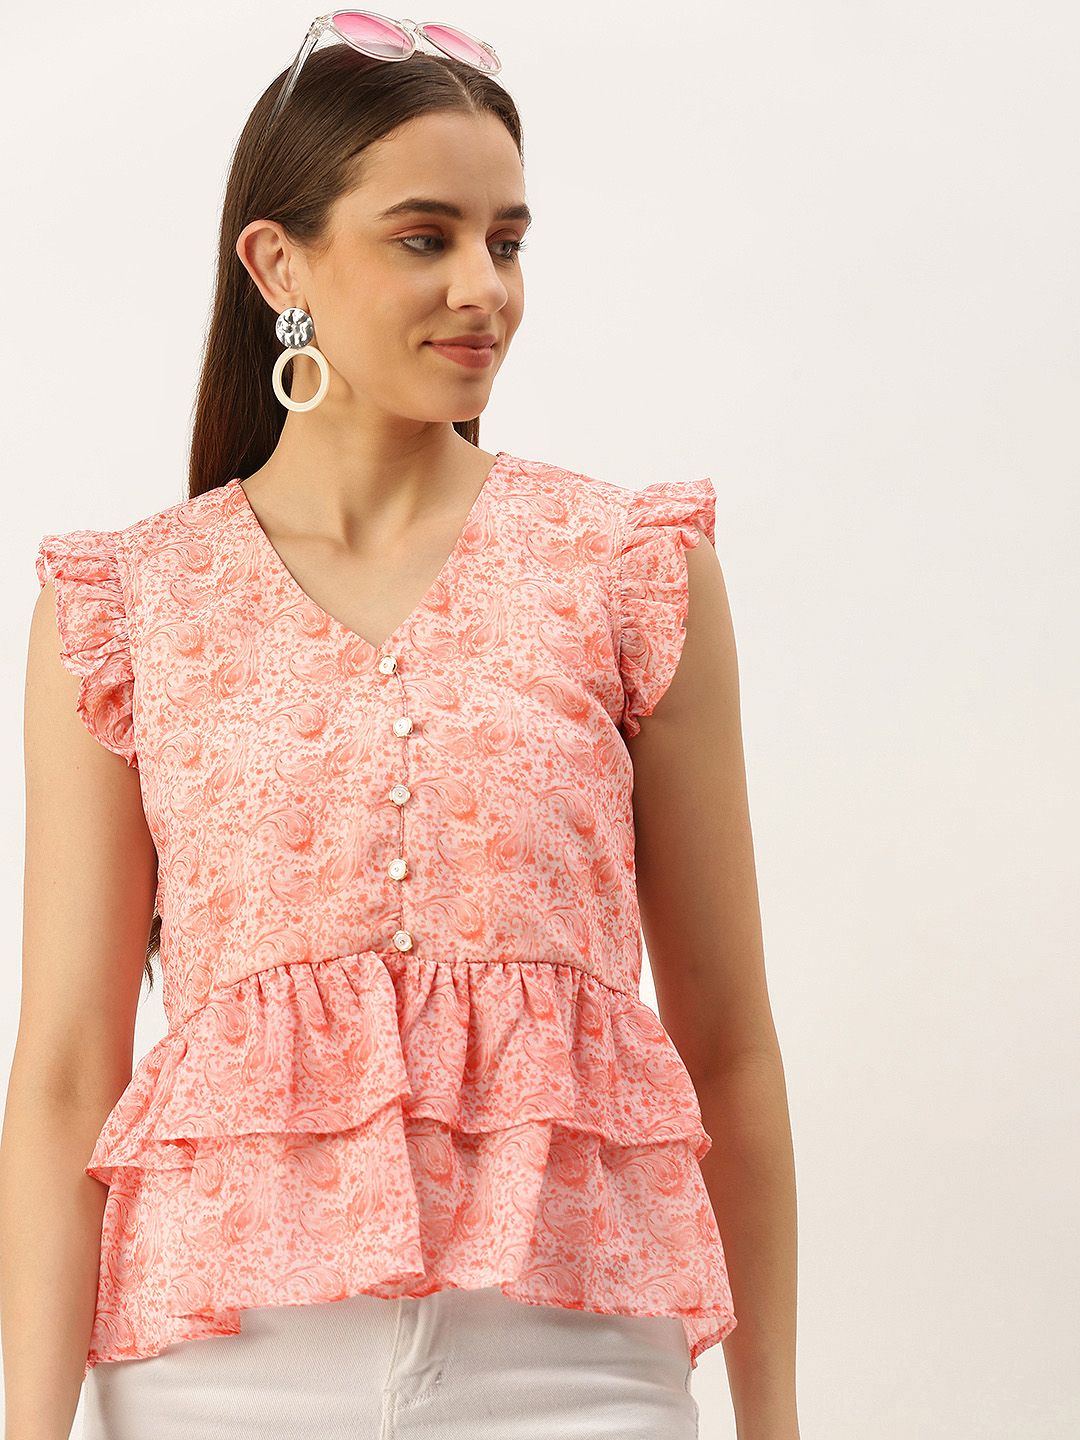 MELOSO Peach-Coloured Floral Print Ruffles Georgette Cinched Waist Top Price in India